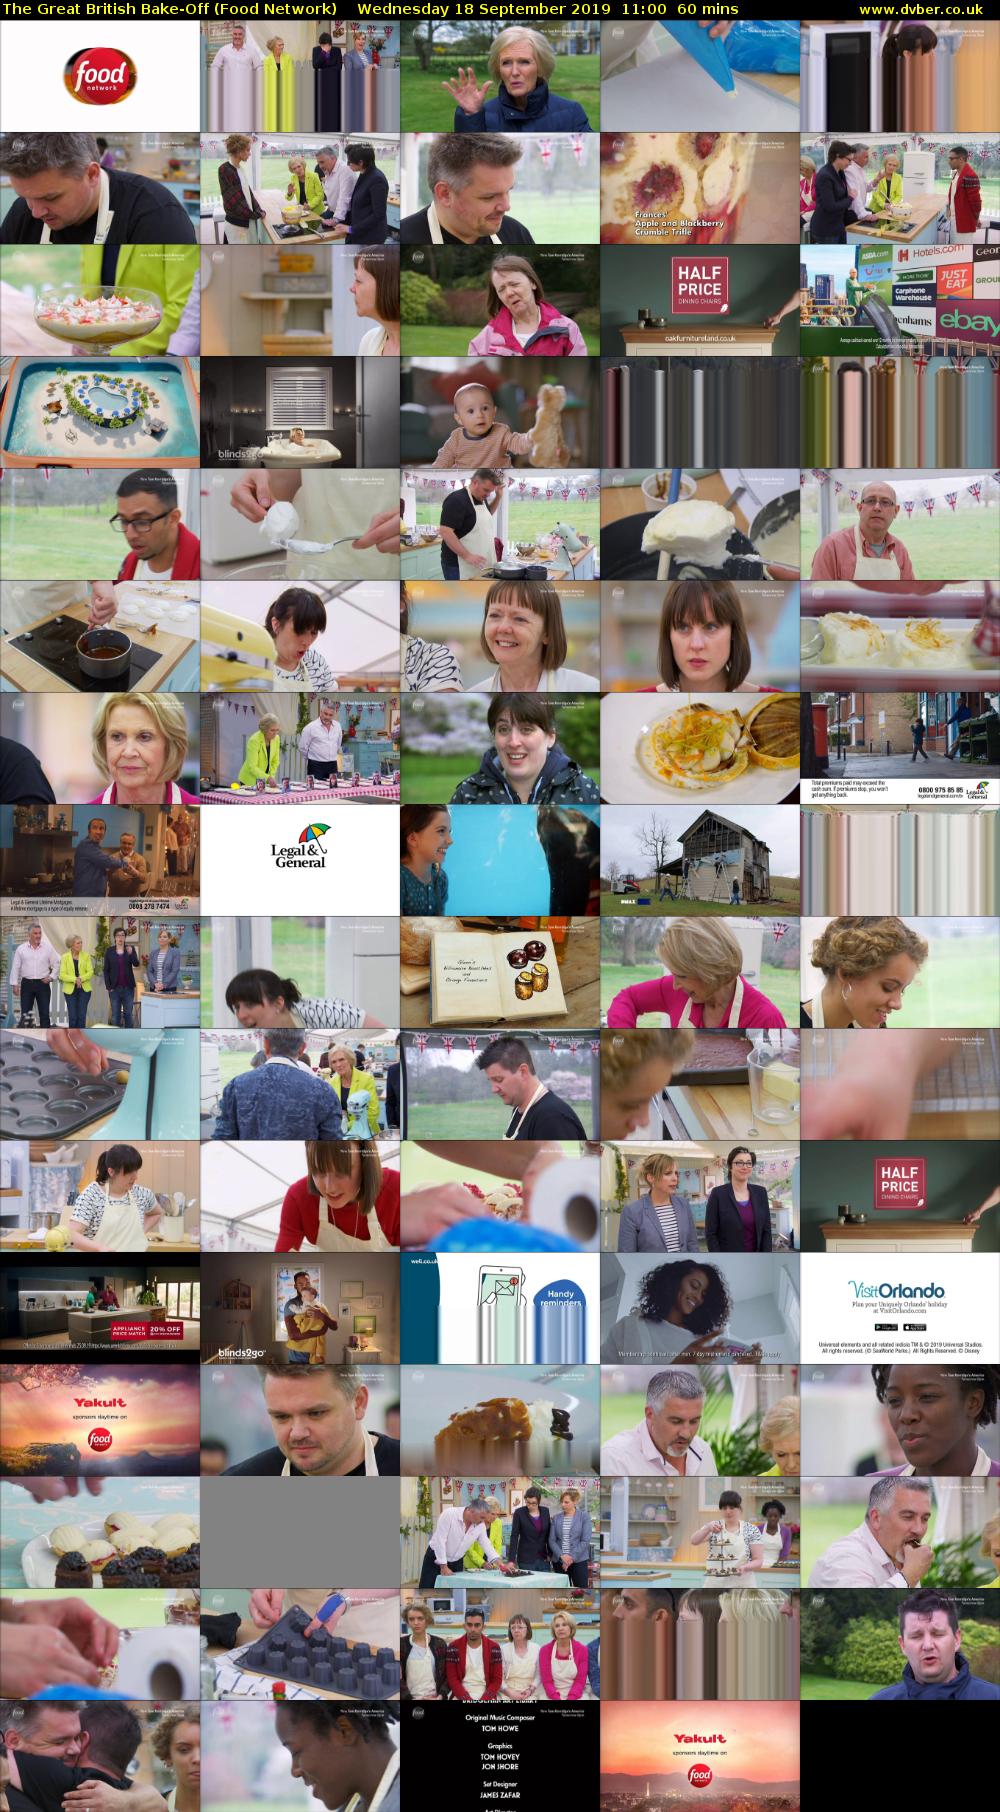 The Great British Bake-Off (Food Network) Wednesday 18 September 2019 11:00 - 12:00